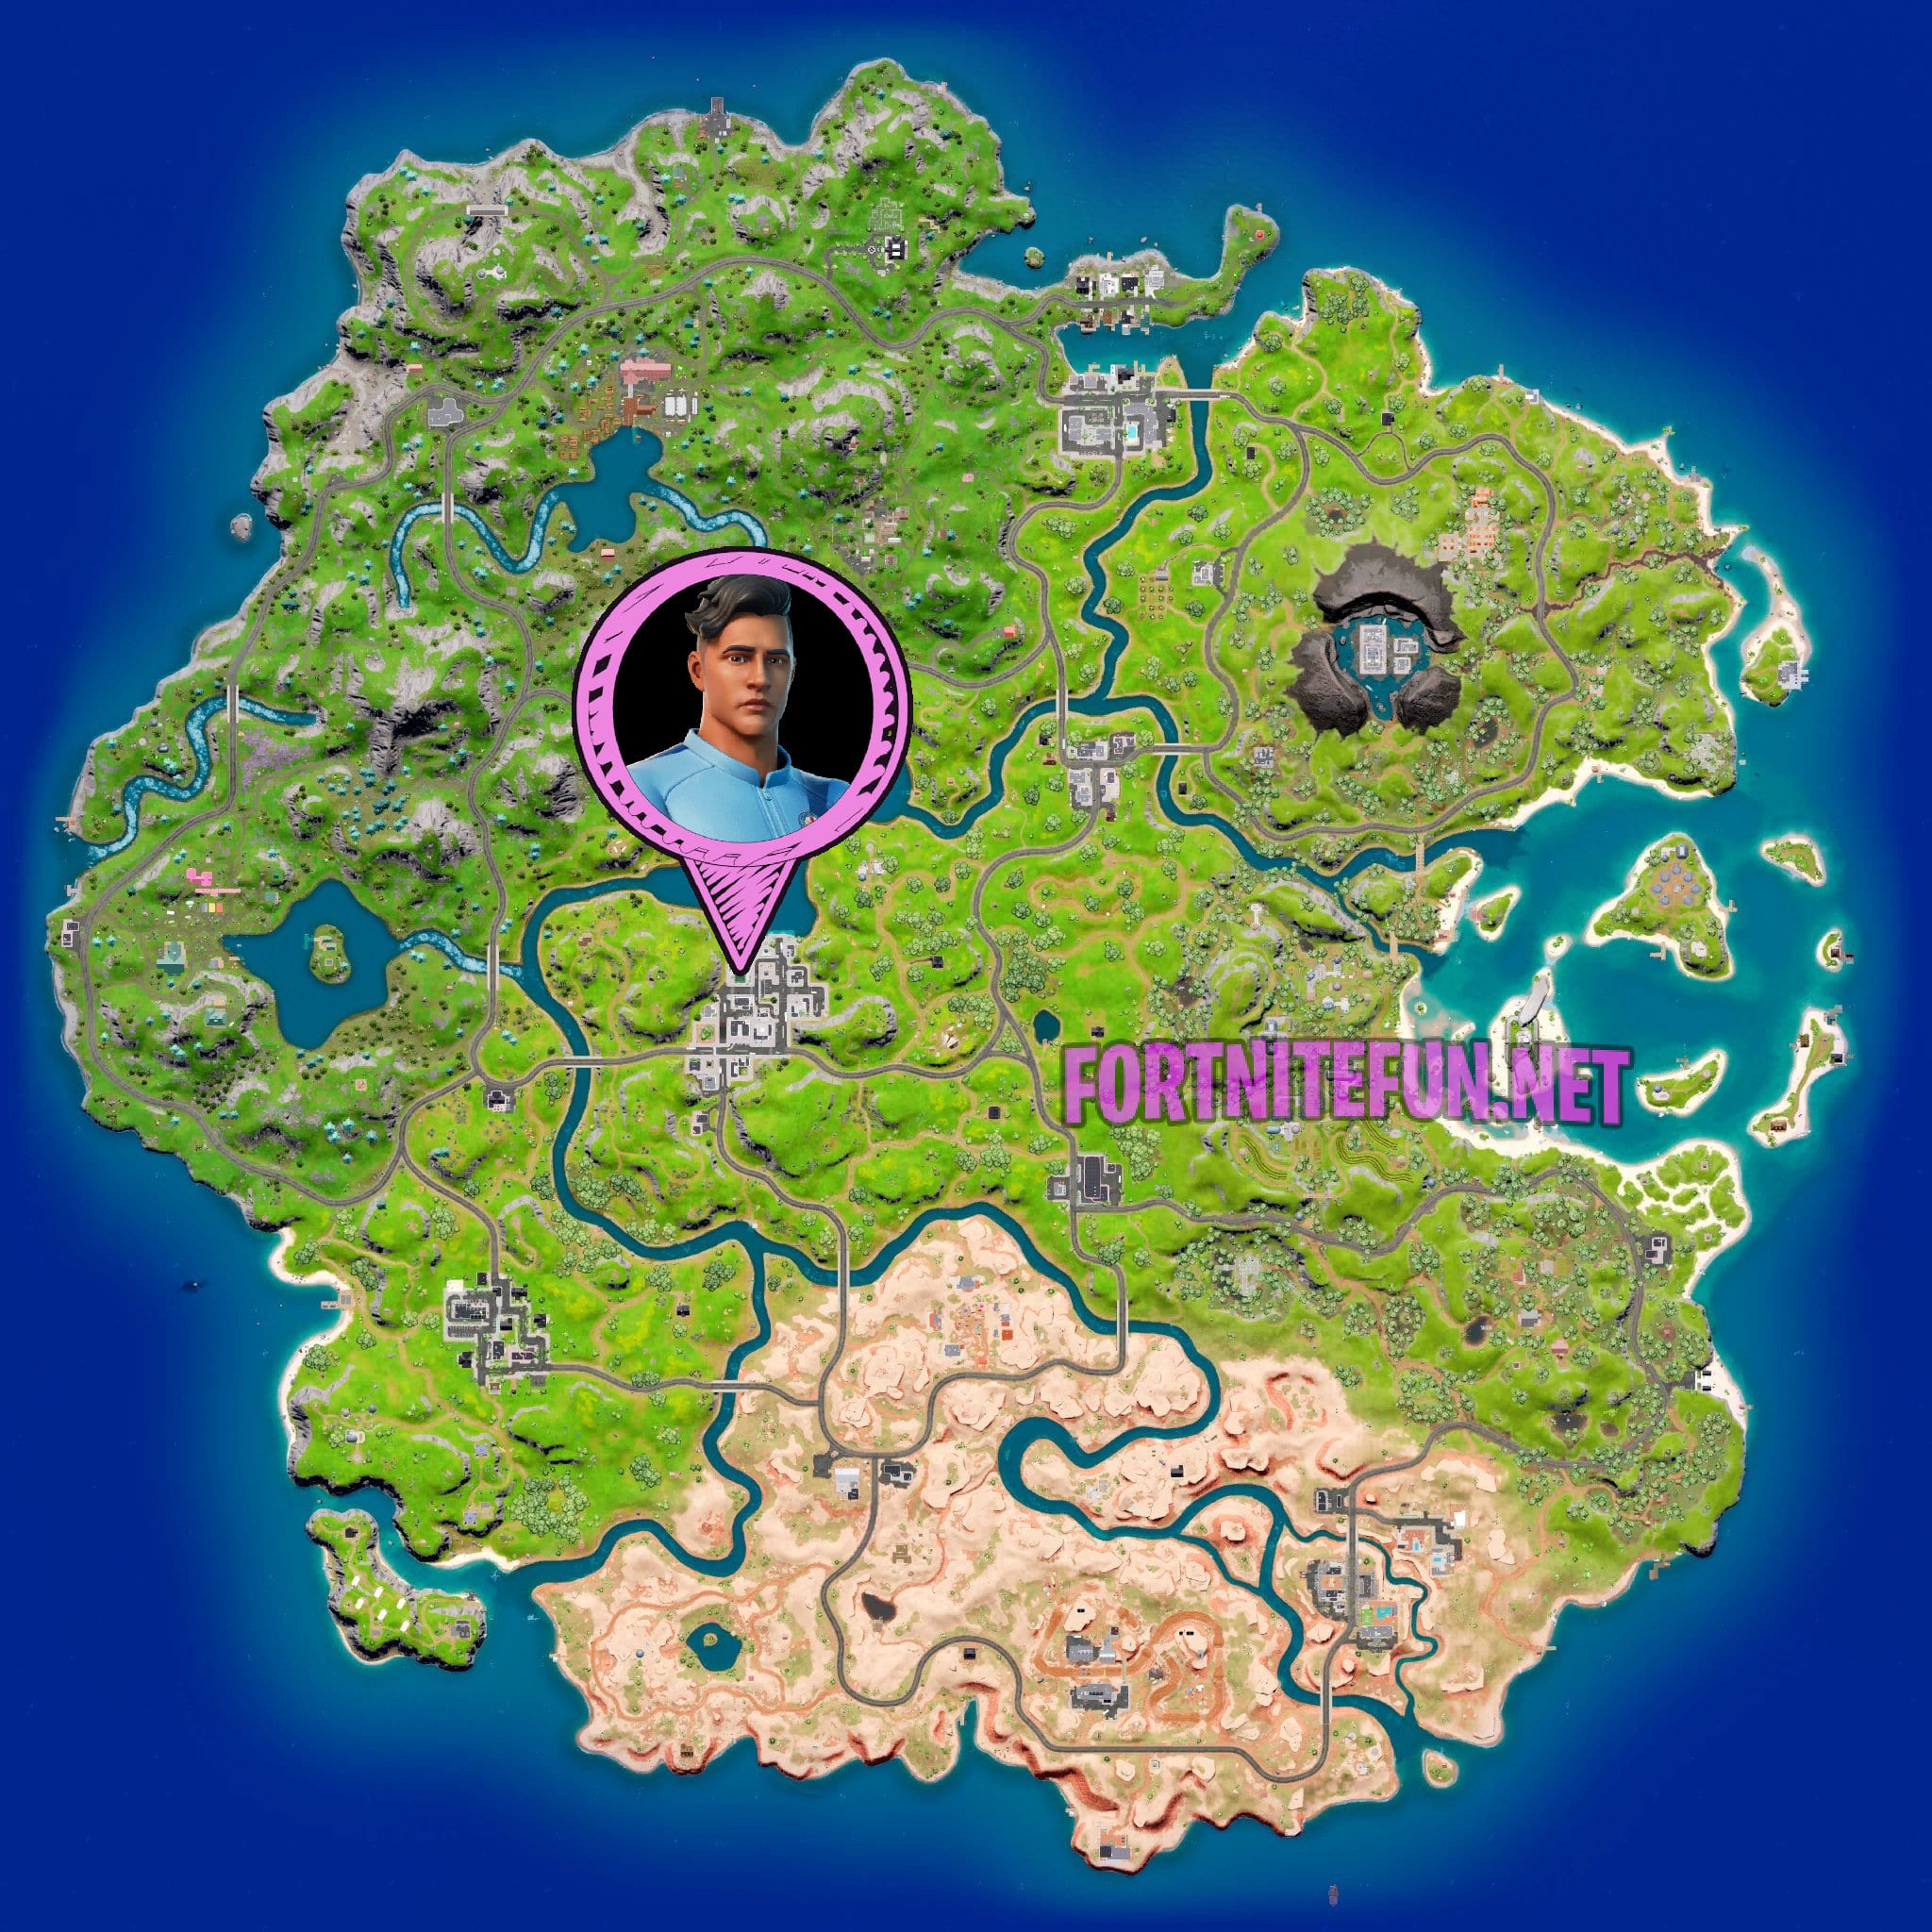 Where to find the NPCs 21 and 22 in Fortnite